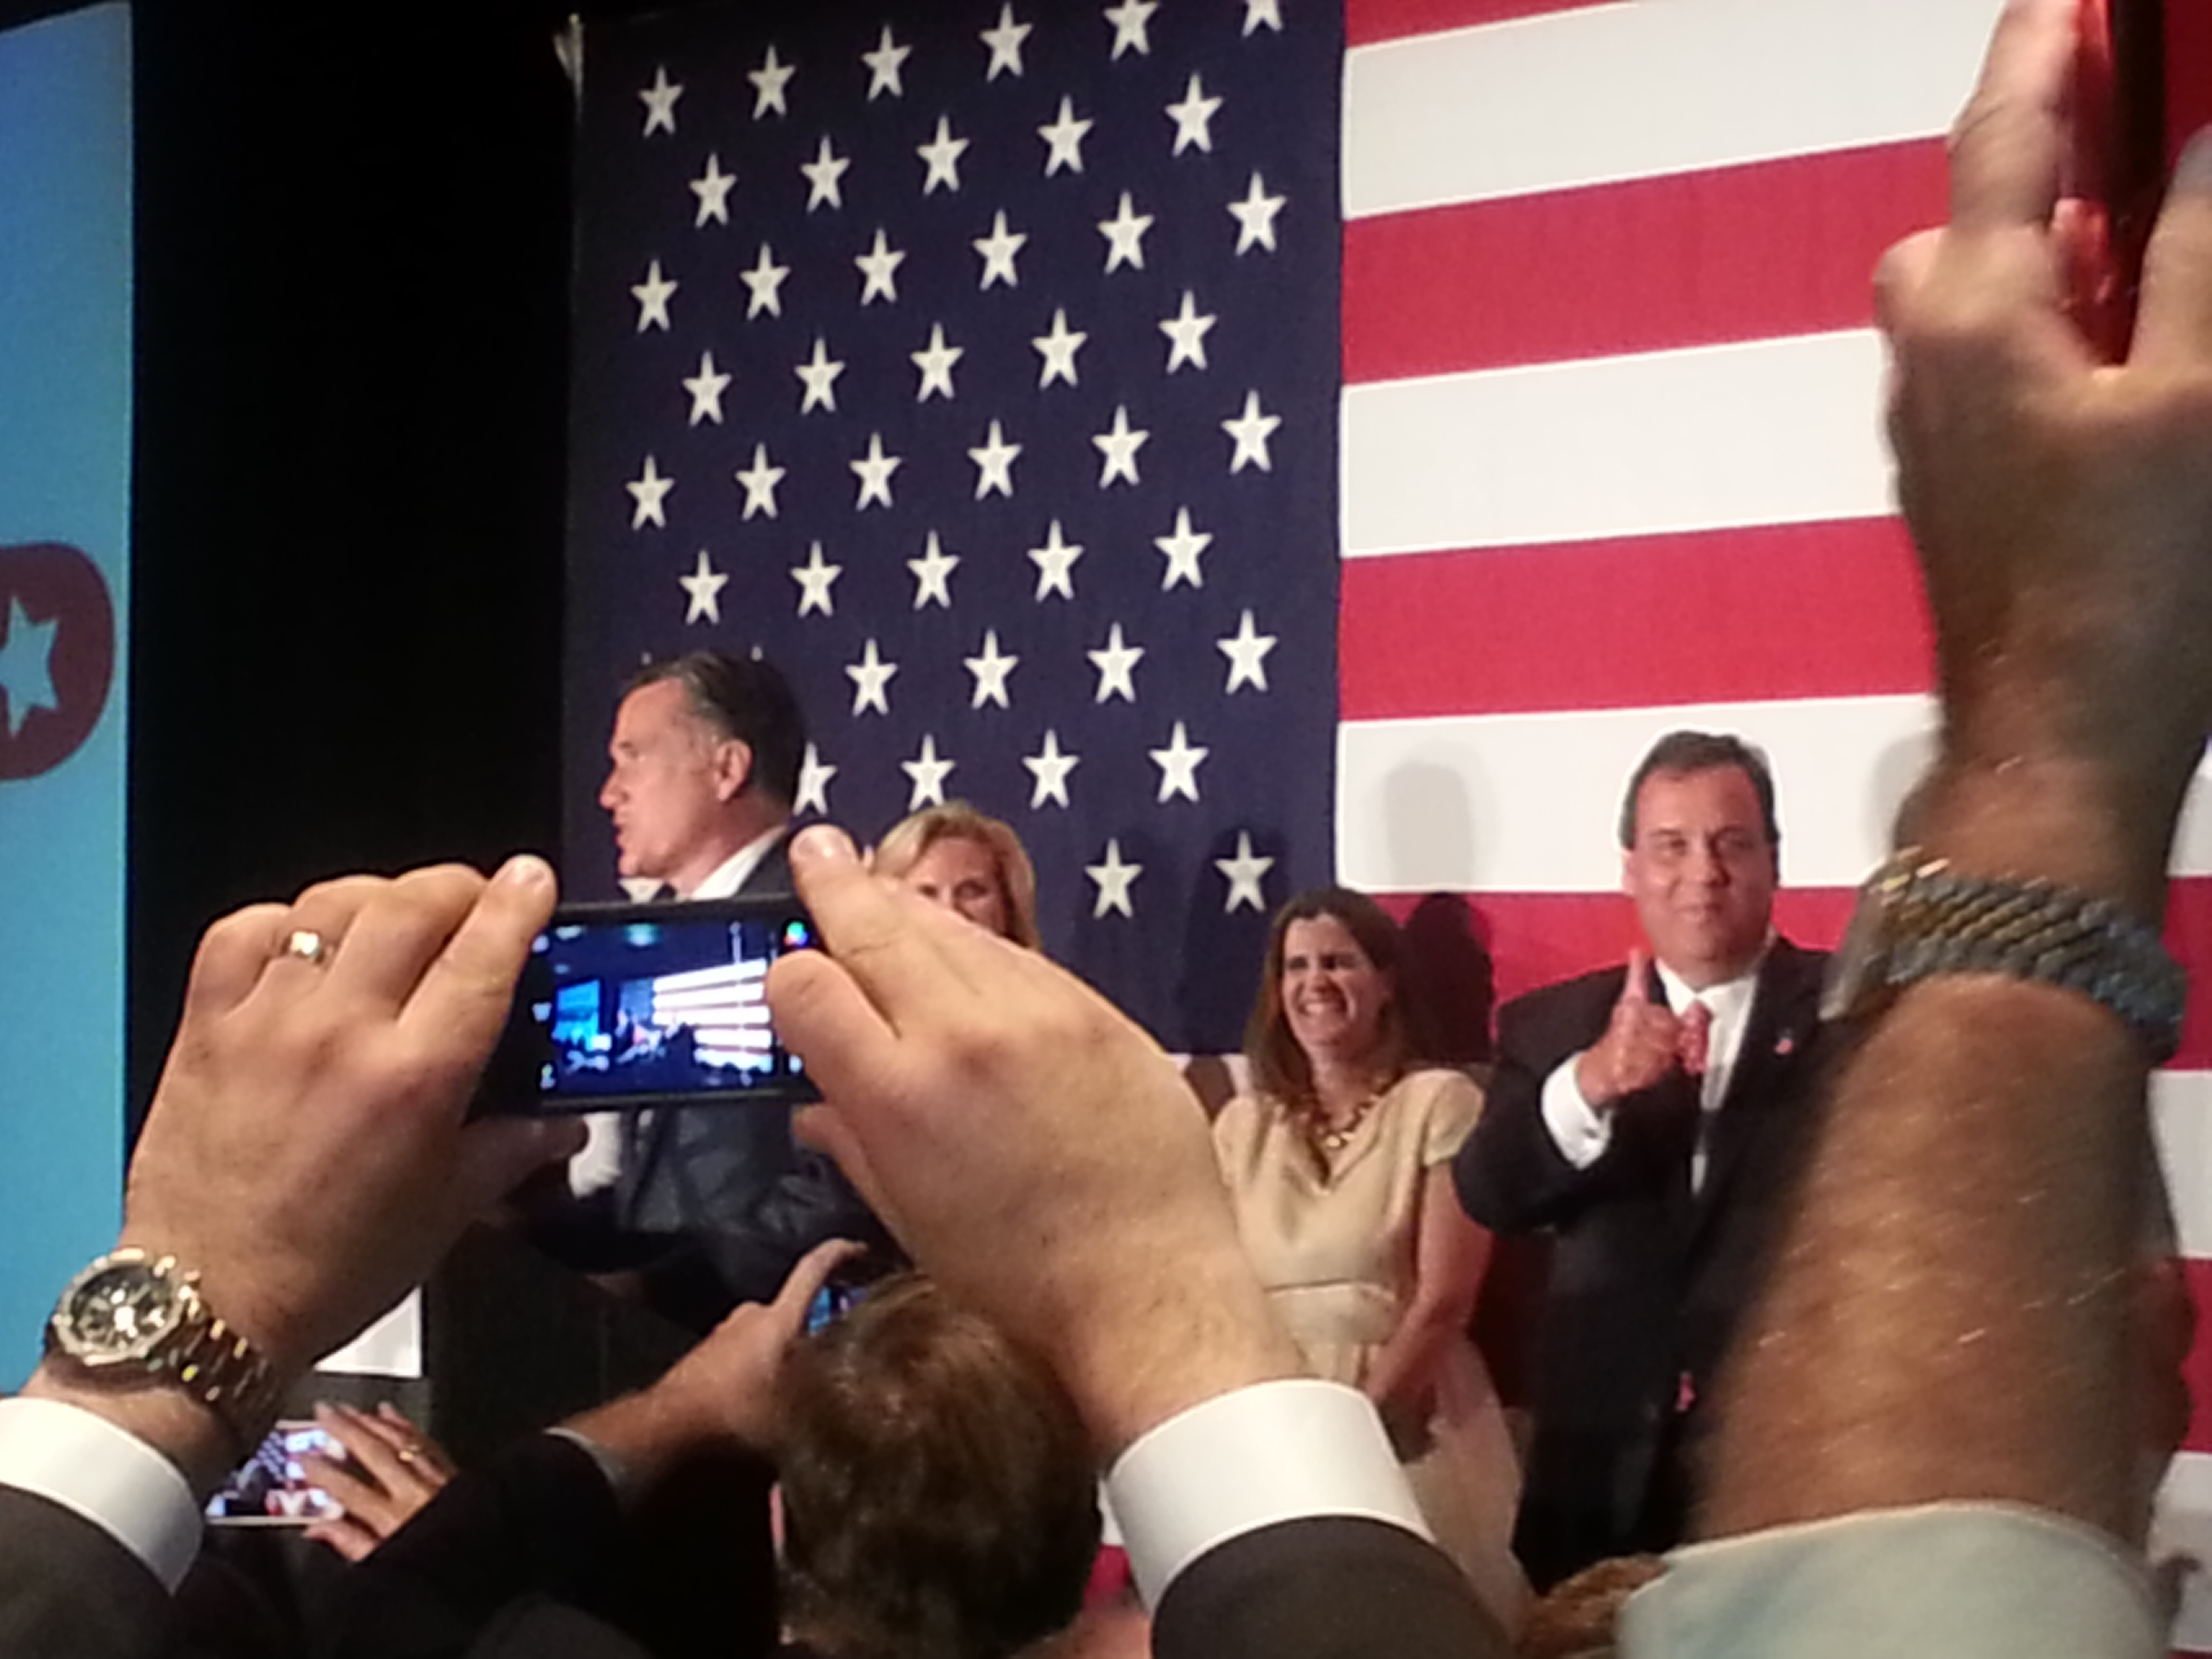 Taking a Pass, Romney to Meet Christie for Dinner